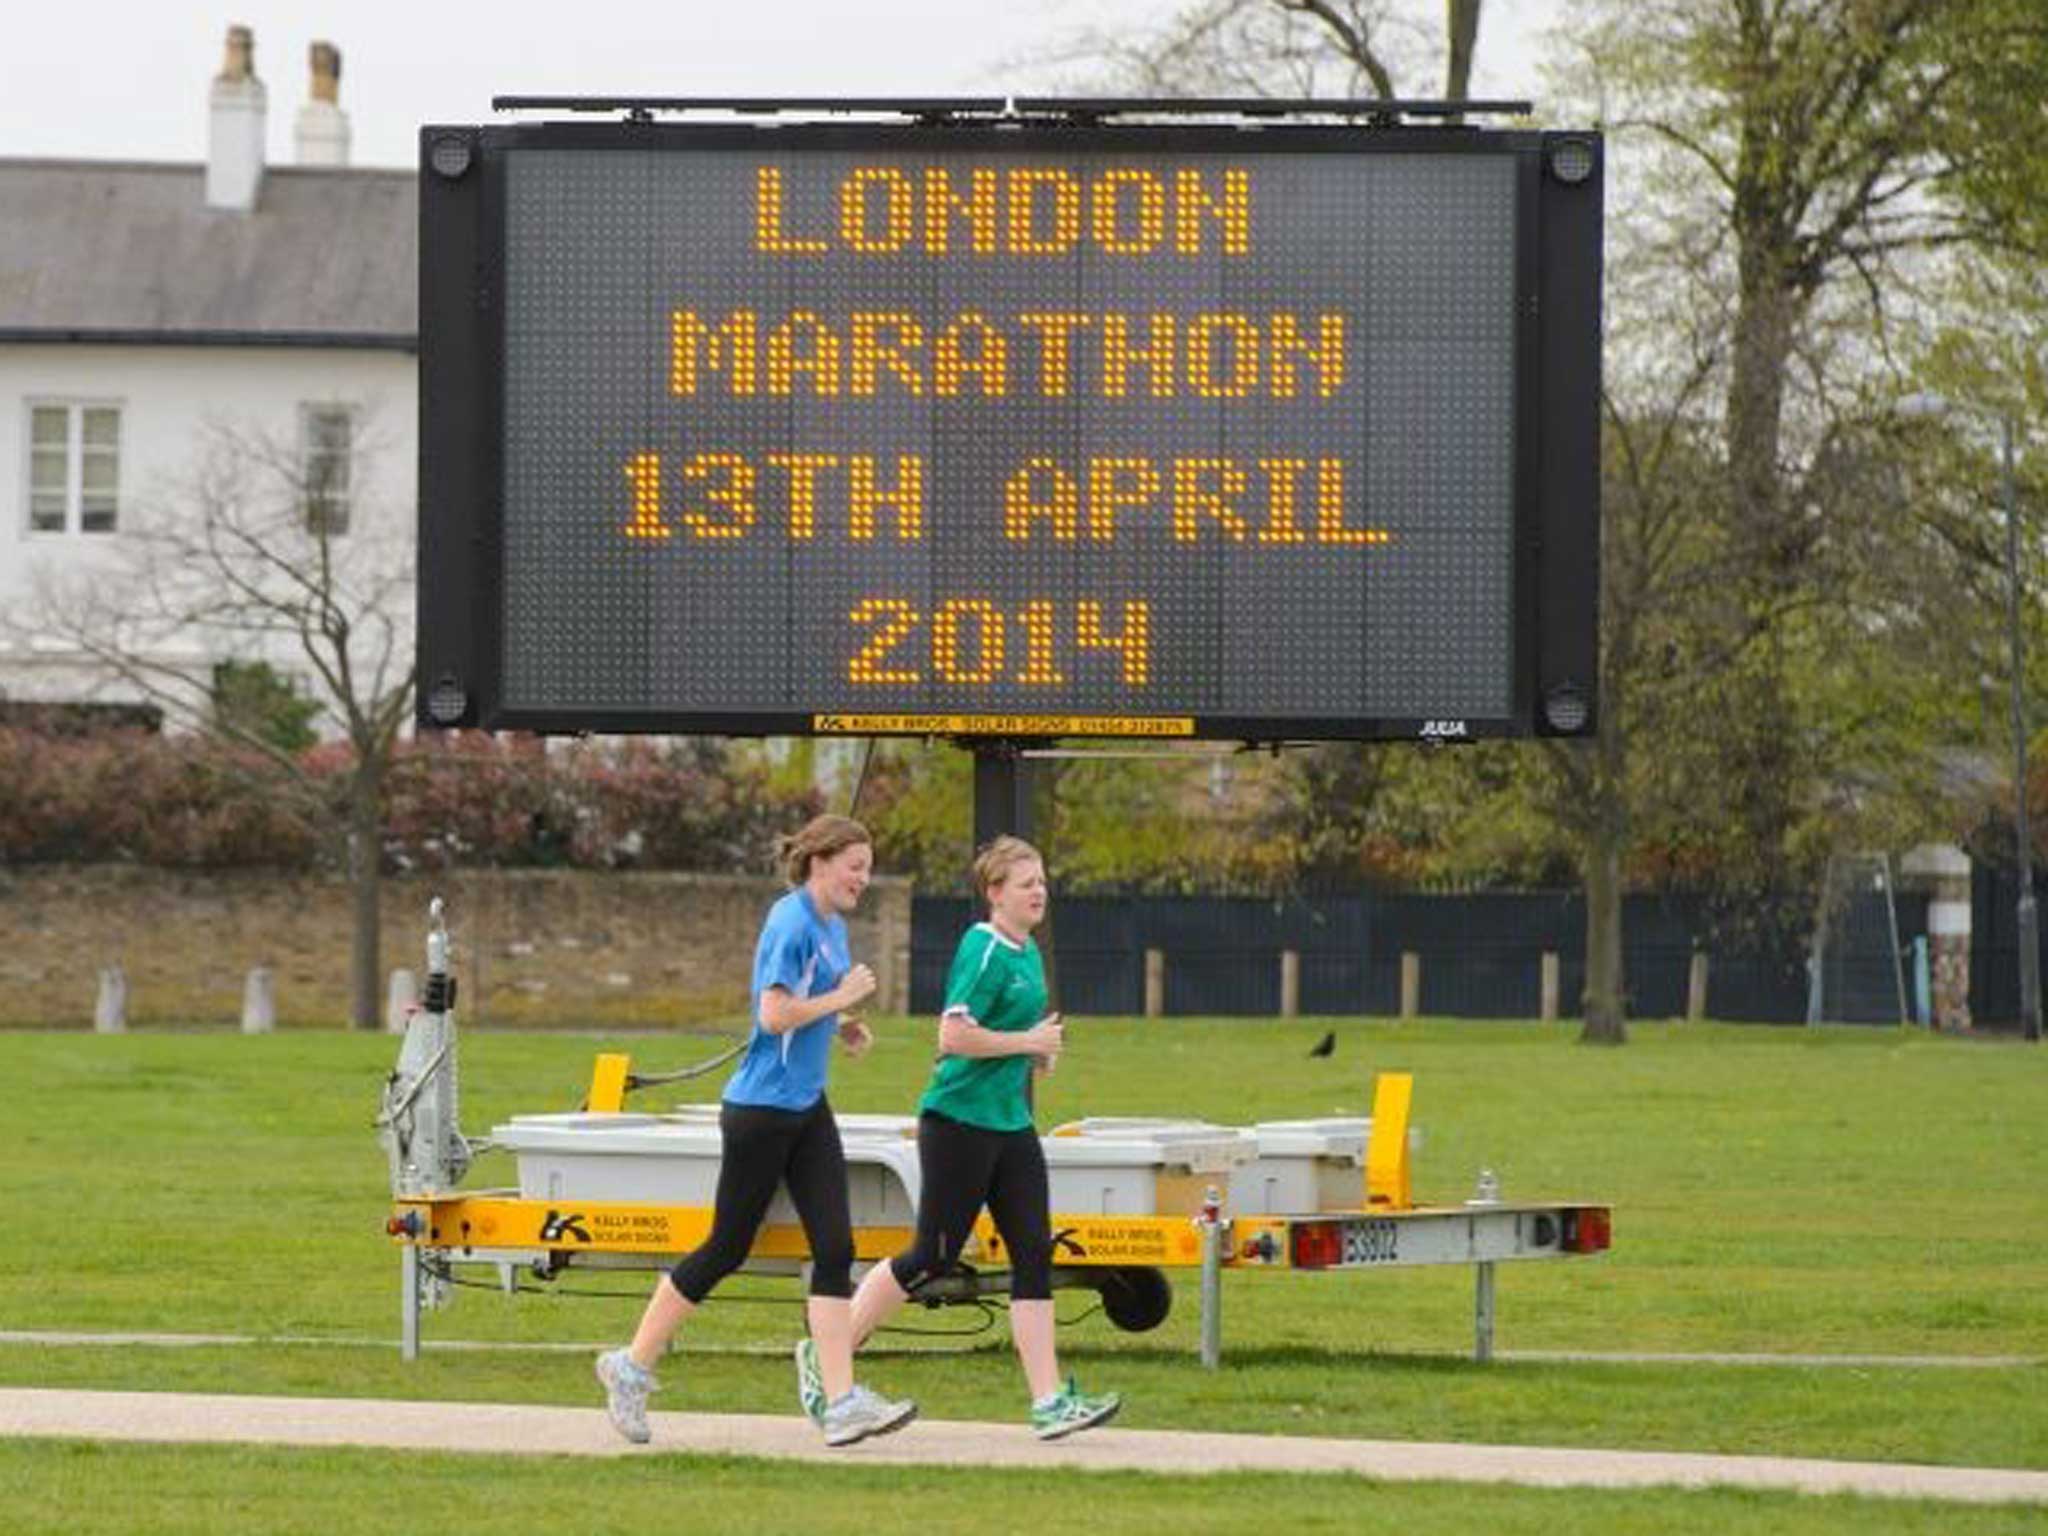 The London Marathon is this weekend